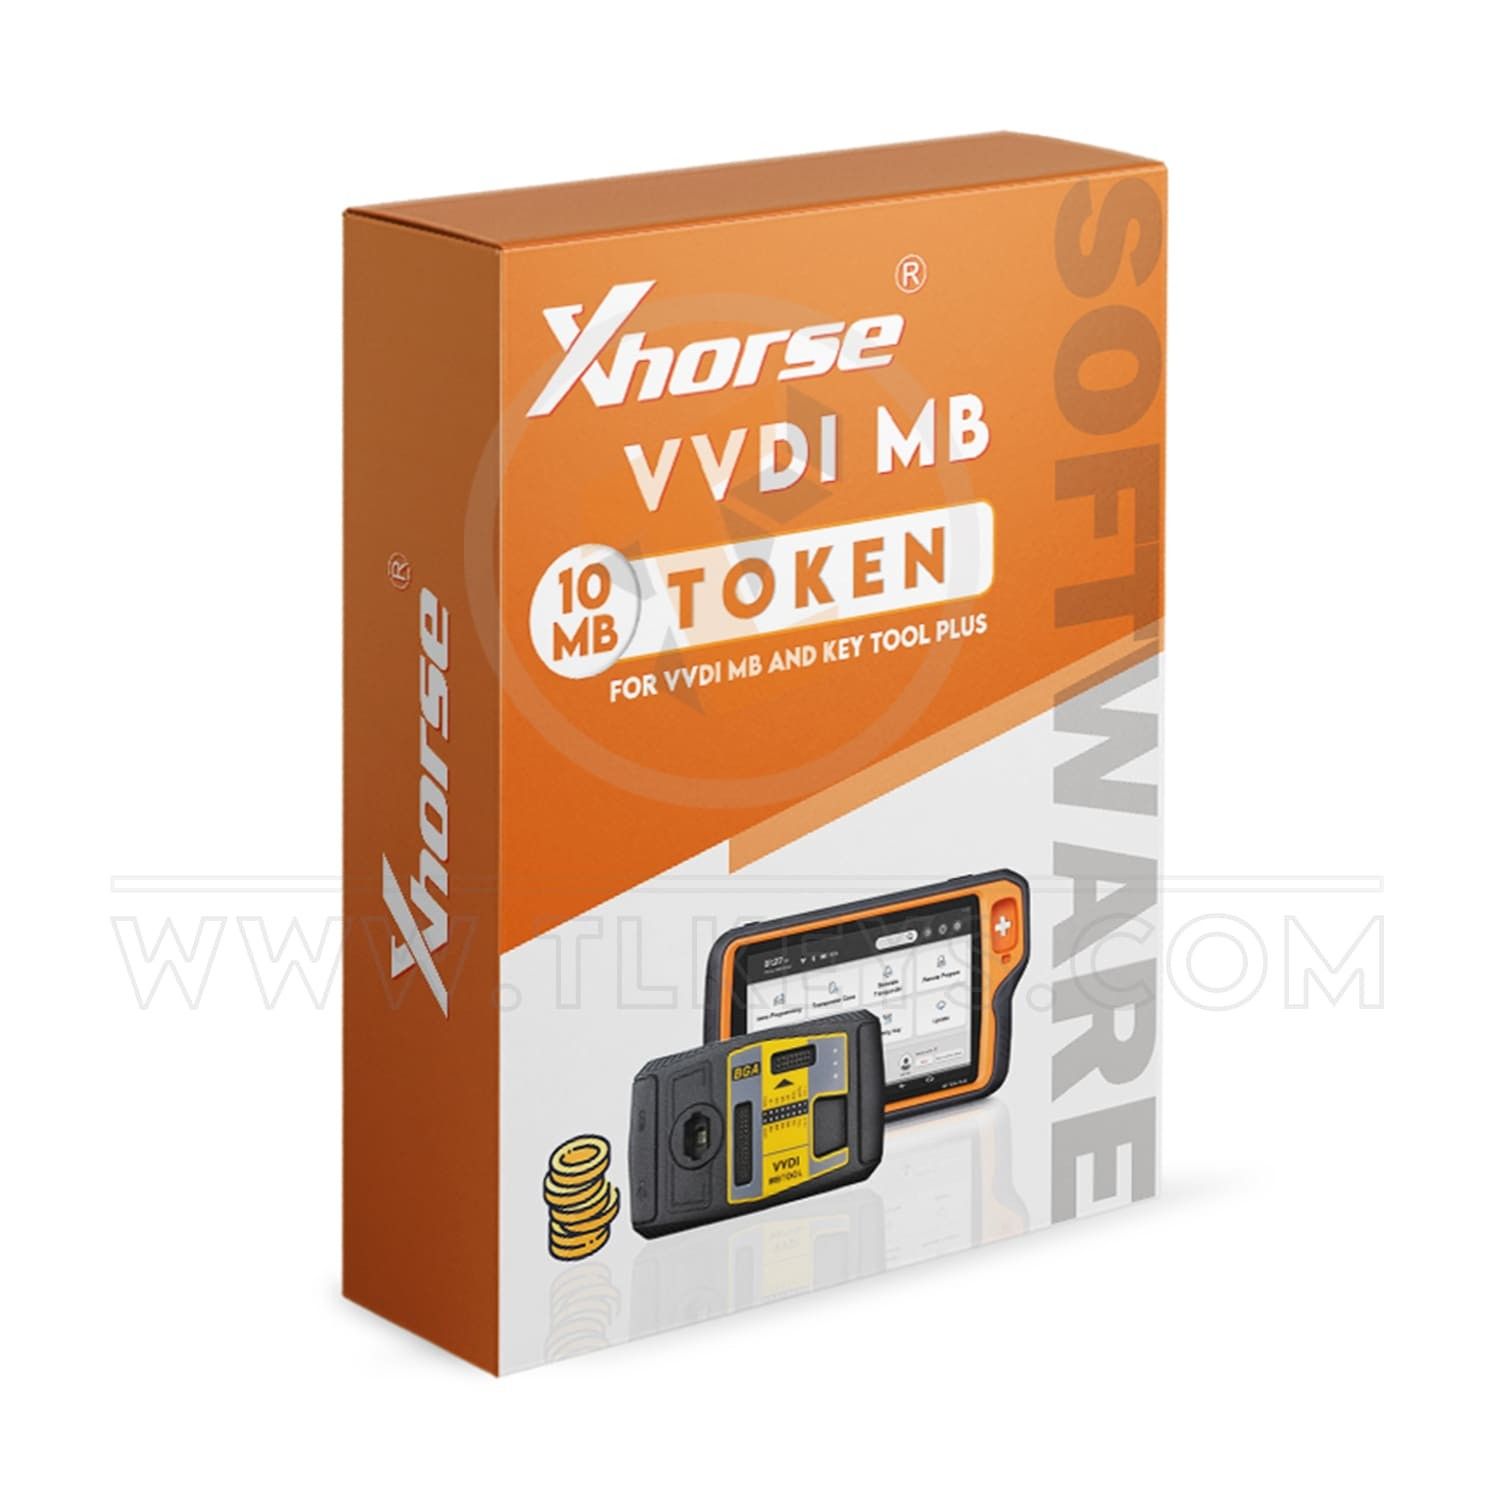 Xhorse 10 MB Token For VVDI MB And Key Tool Plus token